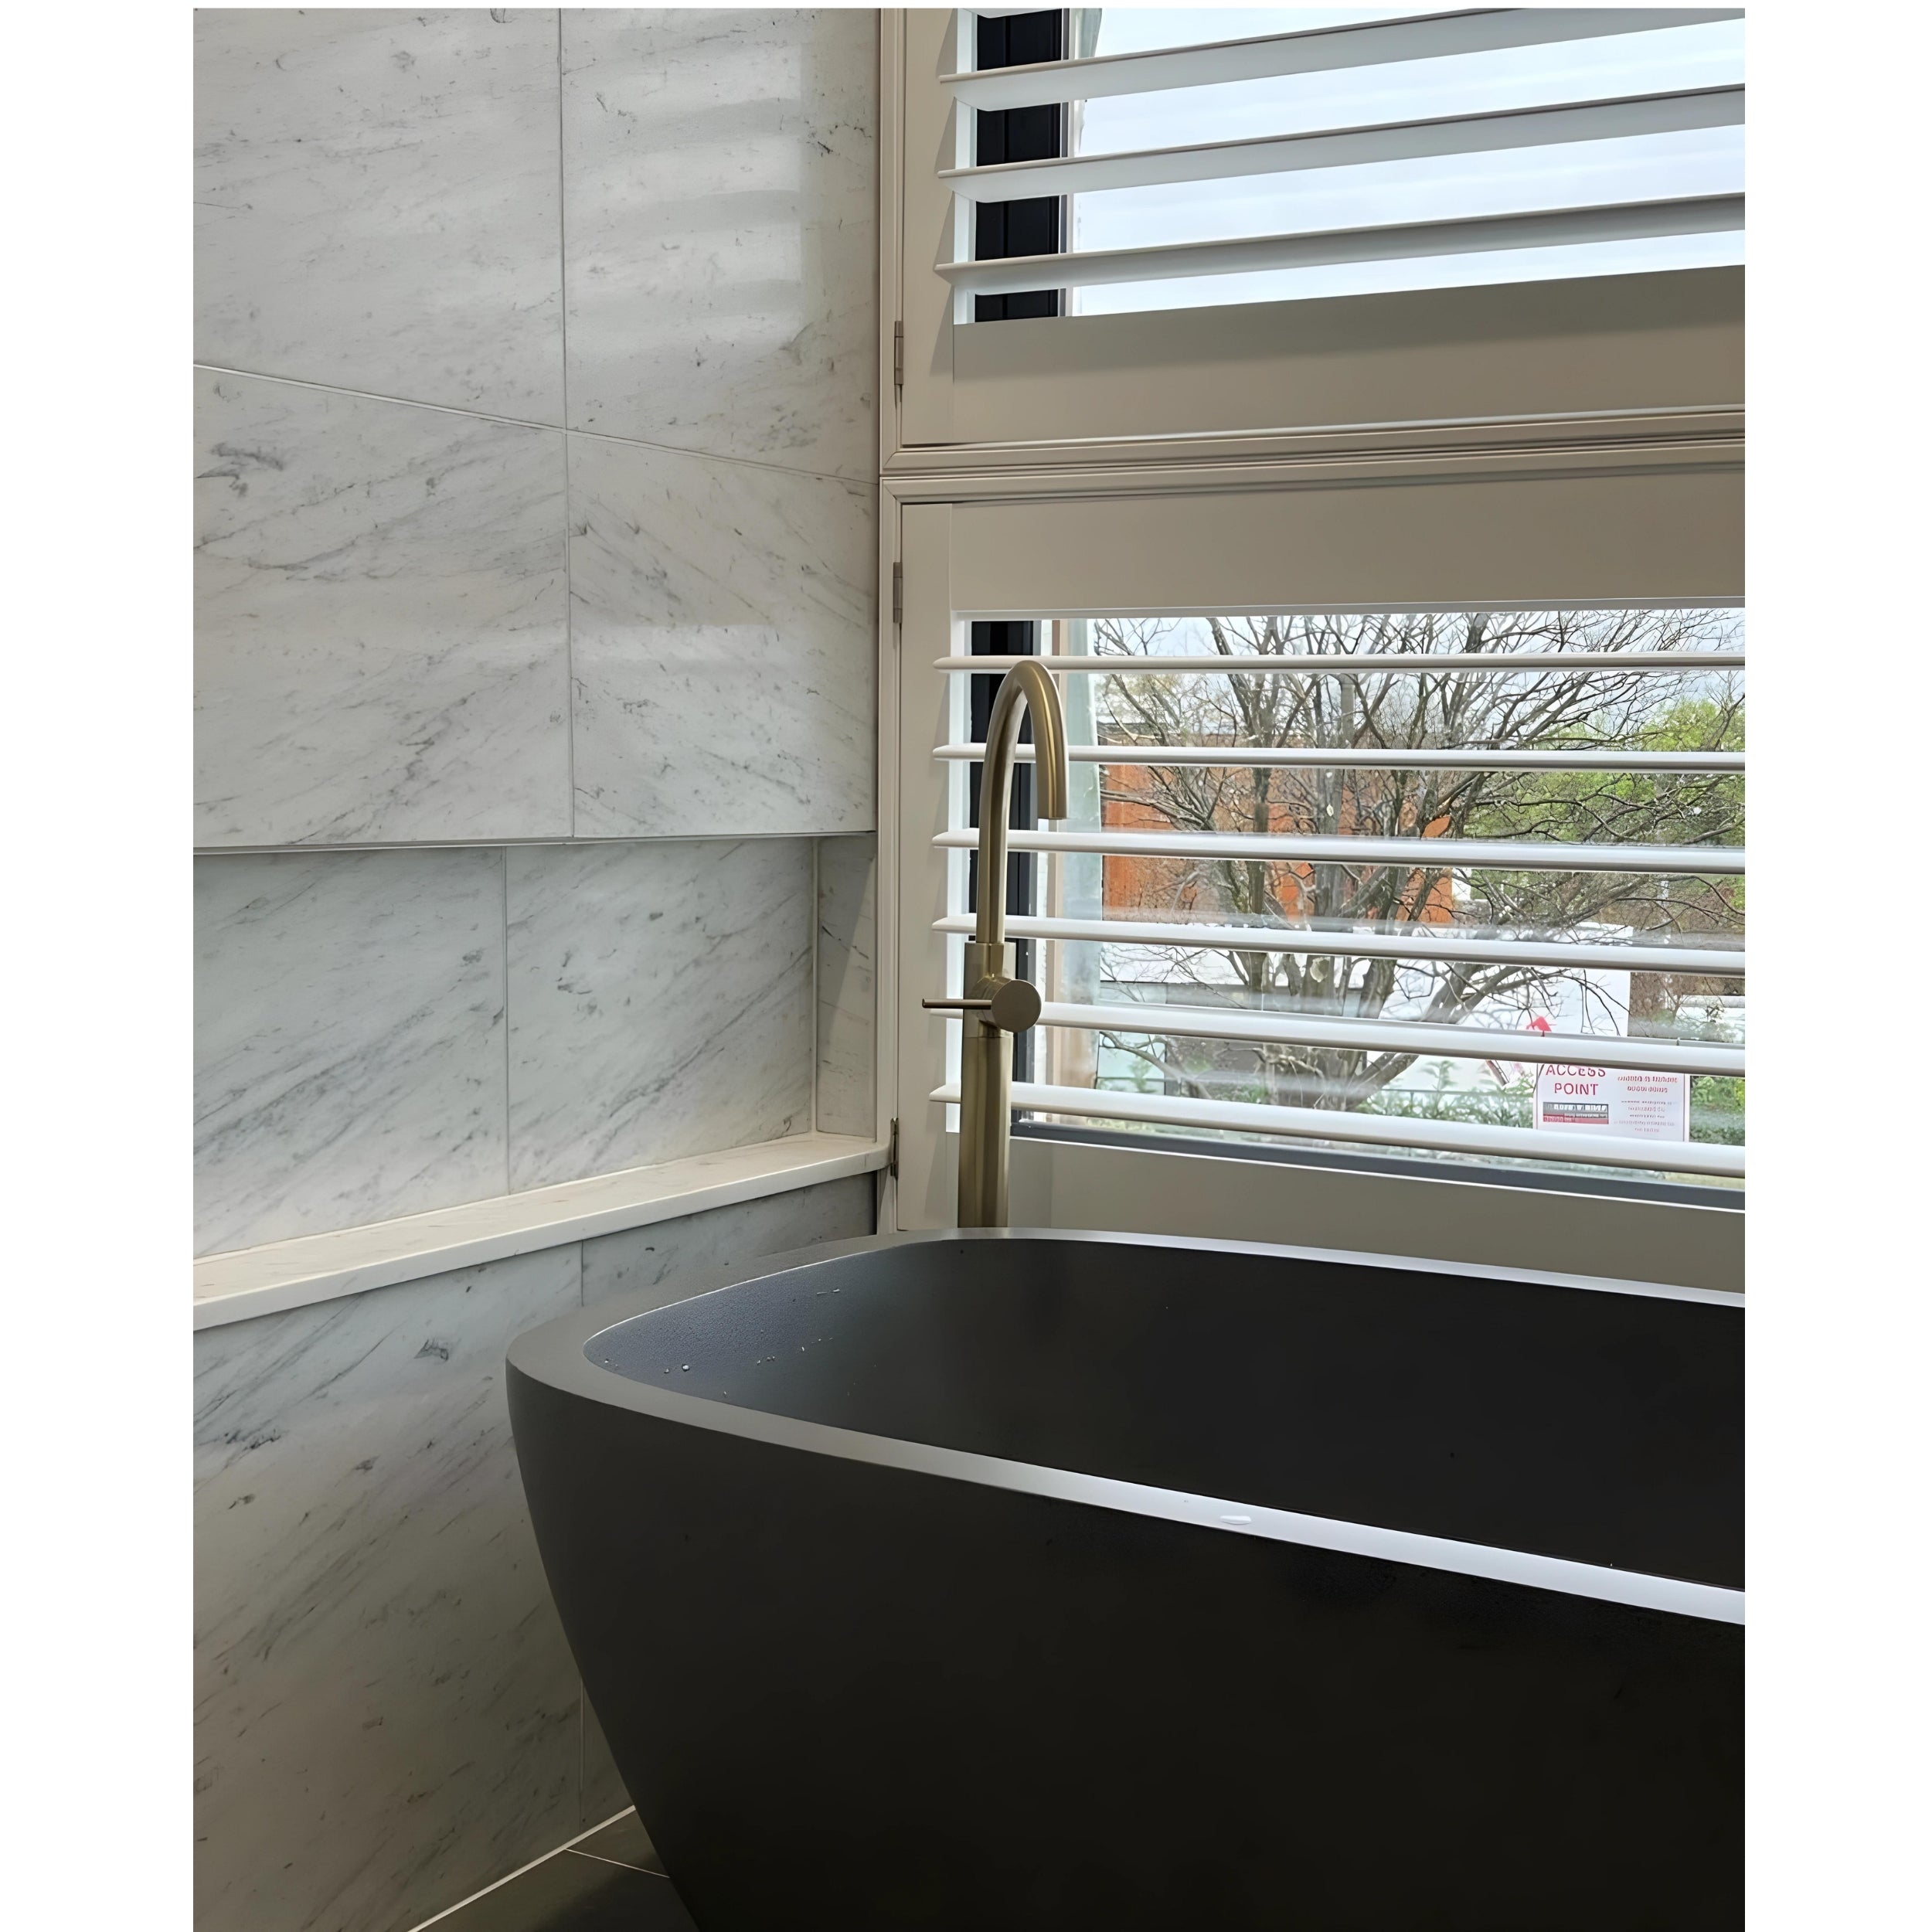 PIETRA BIANCA CHELSEA FREESTANDING STONE BATHTUB WITH MULTICOLOUR (AVAILABLE IN 1500MM, 1600MM AND 1700MM)